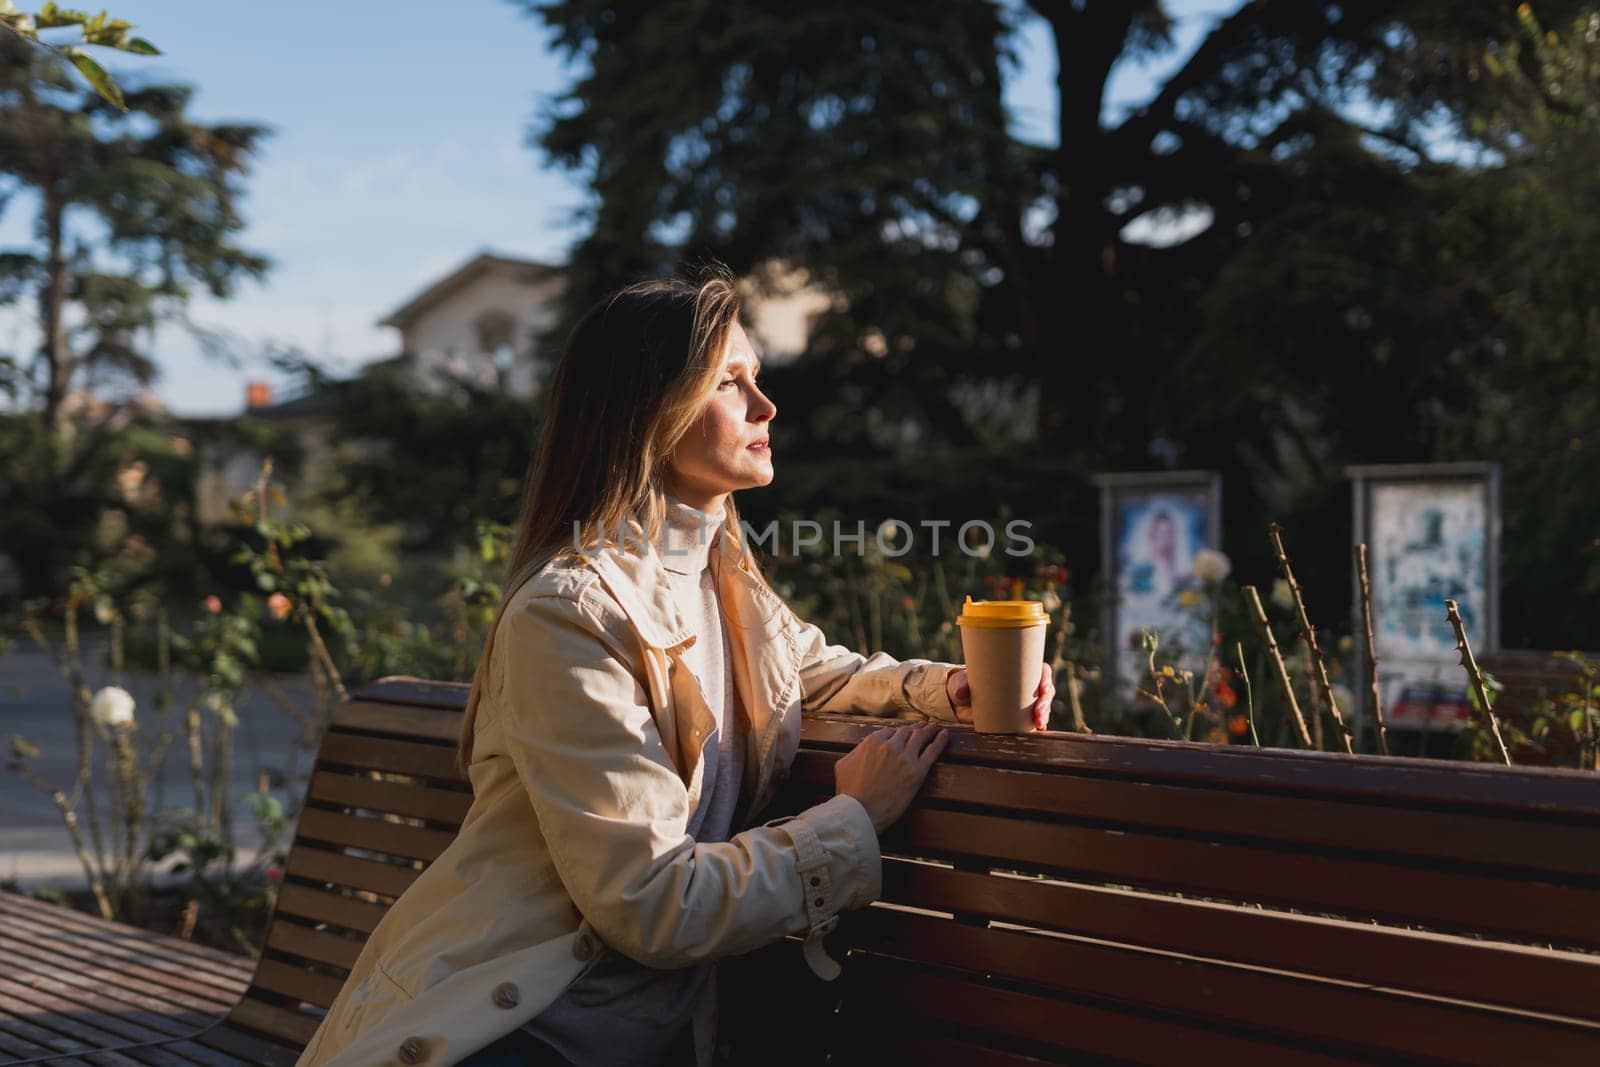 Woman drinks from cup on wooden bench. She is wearing a white shirt enjoying her beverage. The bench is located in a park setting, with trees in the background. by Matiunina